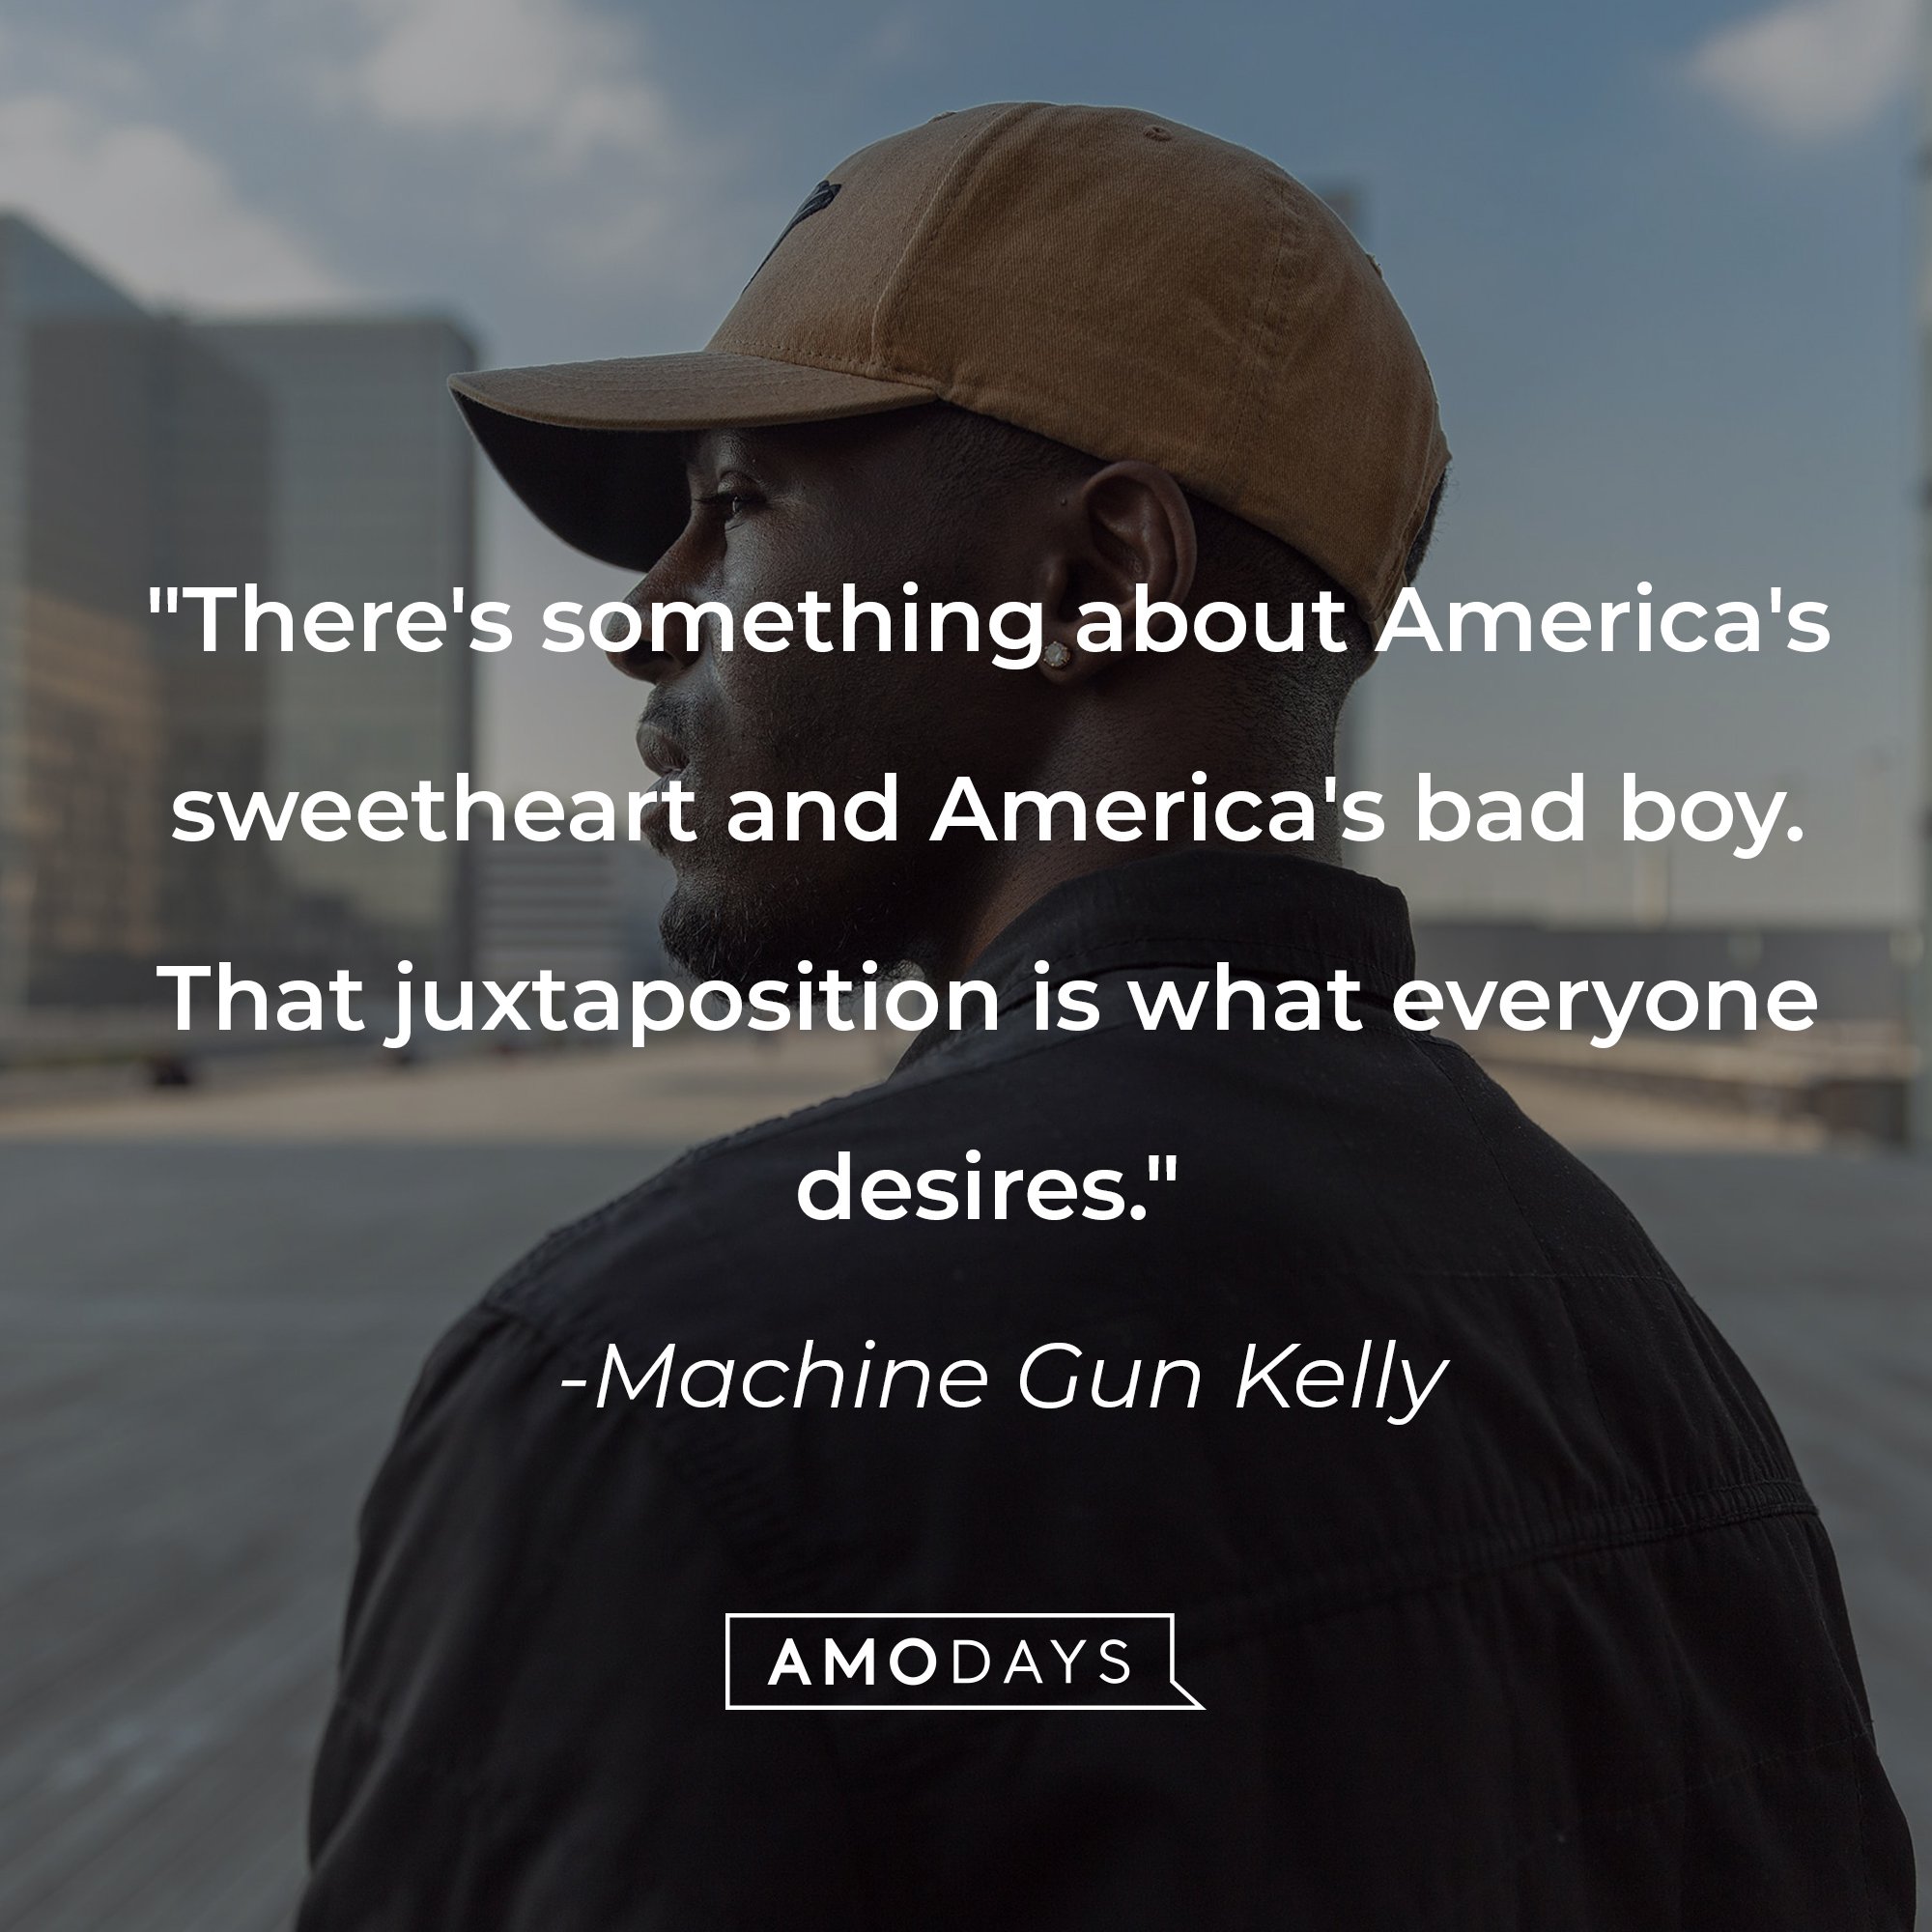 Machine Gun Kelly's quote: "There's something about America's sweetheart and America's bad boy. That juxtaposition is what everyone desires." | Image: AmoDays